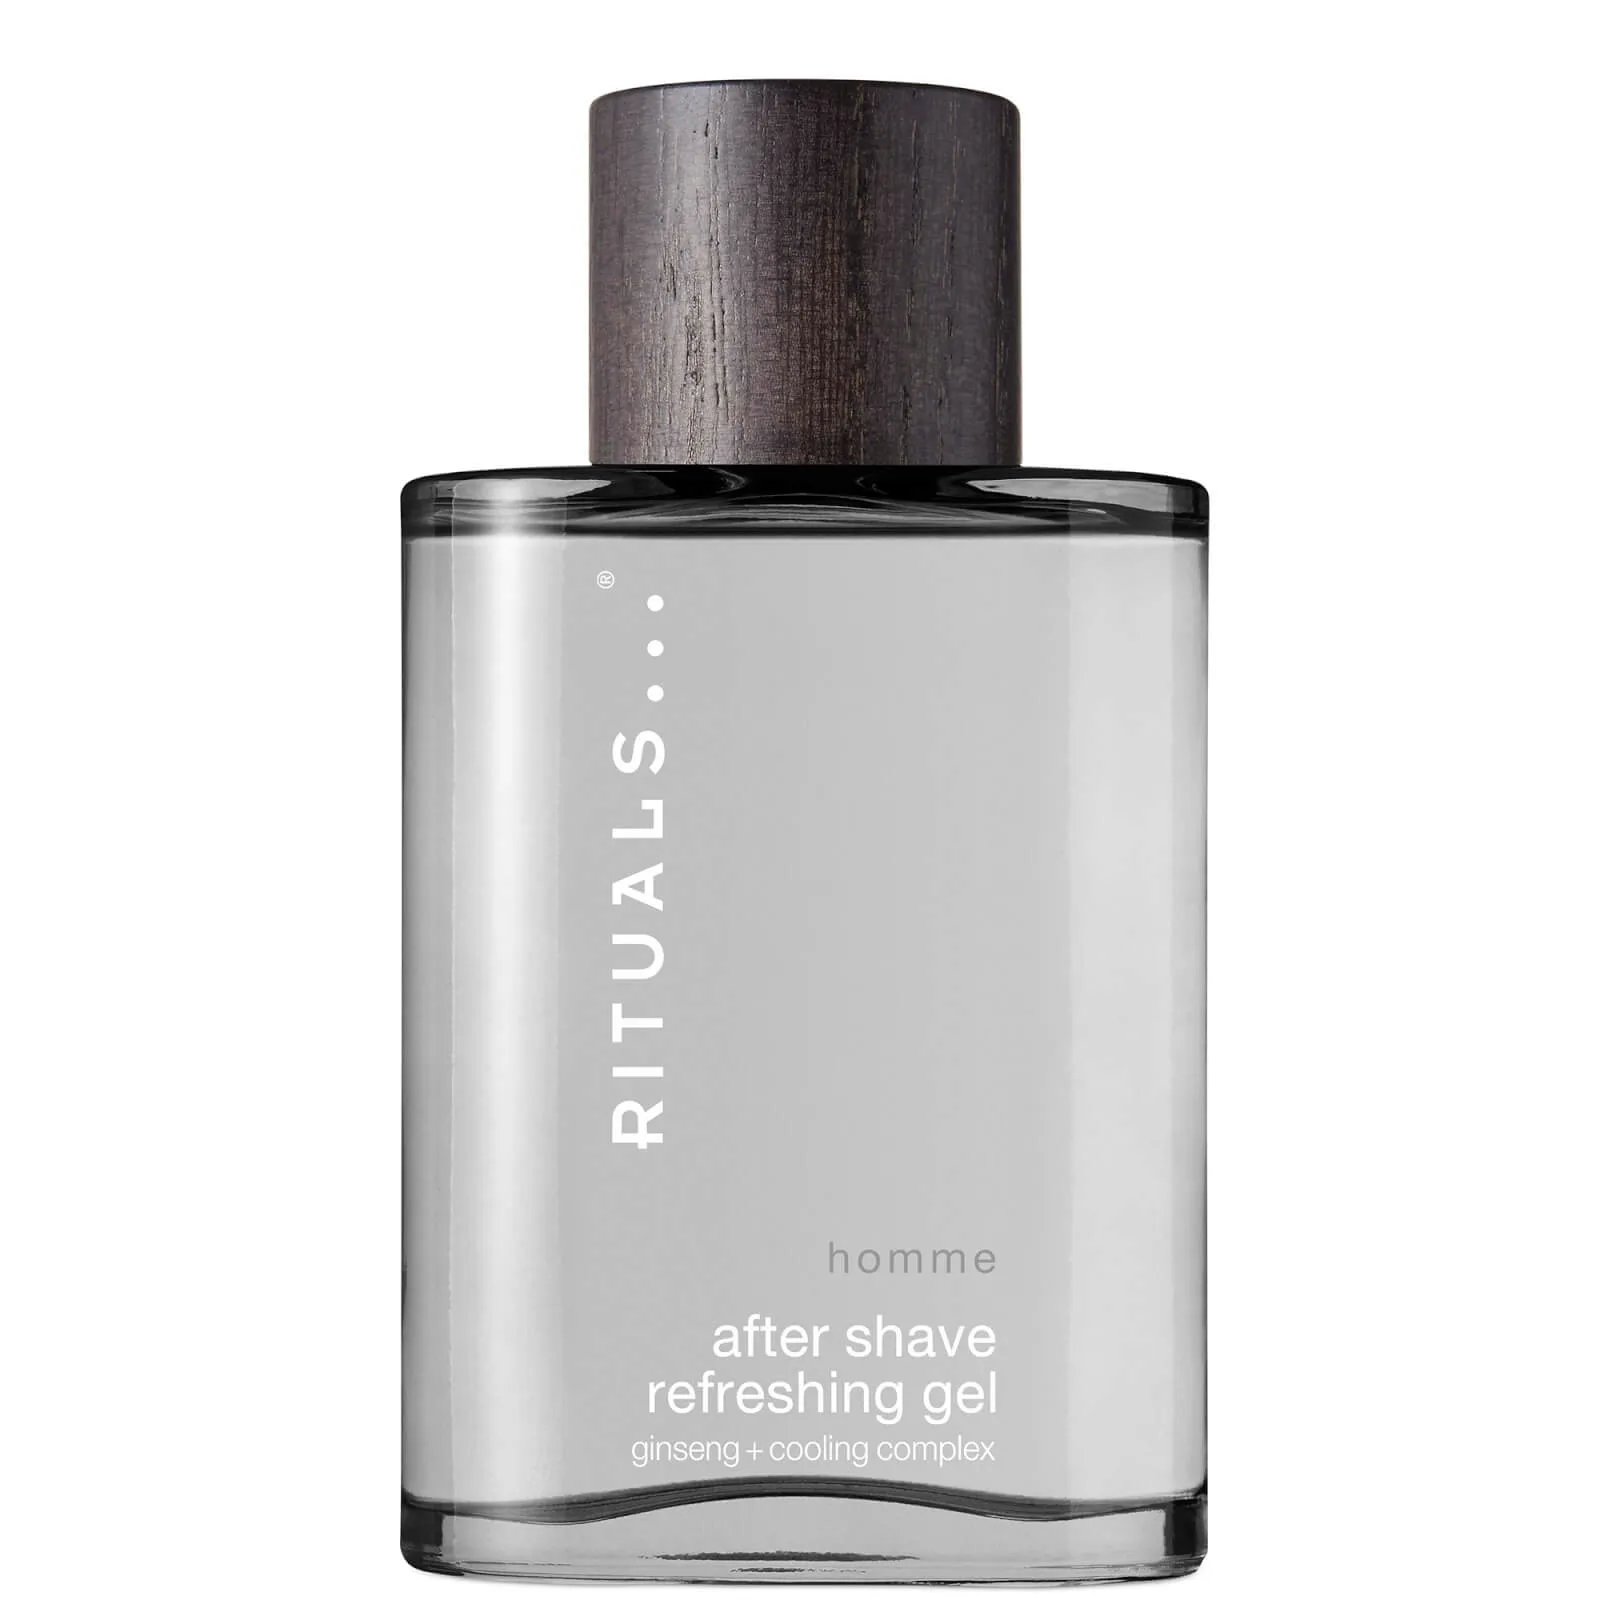  Homme After Shave Refreshing Gel 100ml